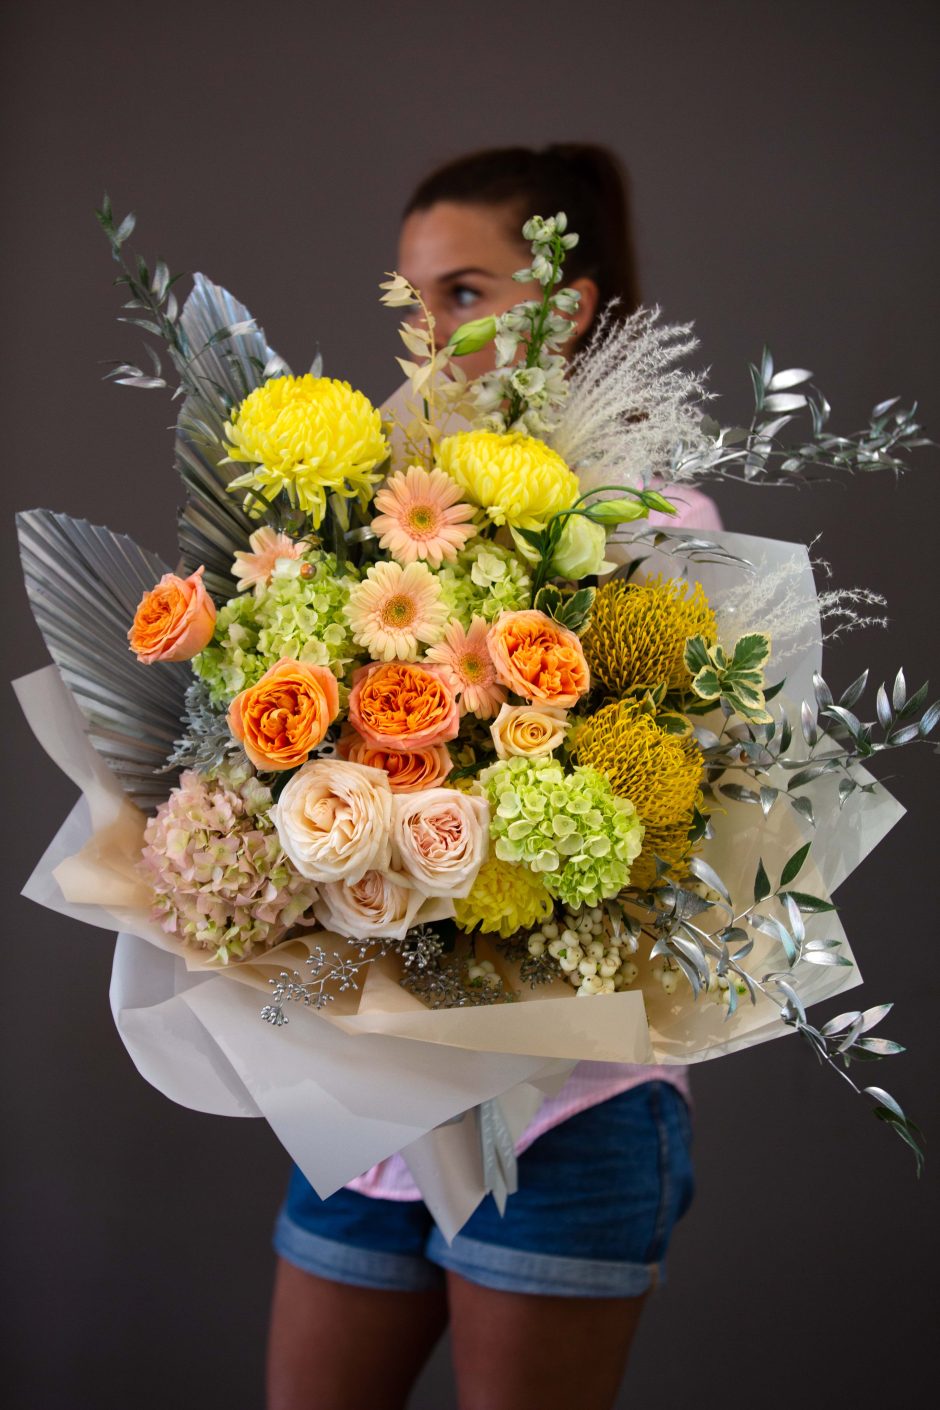 Sunrise Meadow - Garden roses topped off with eye candy flowers - Maison la Fleur